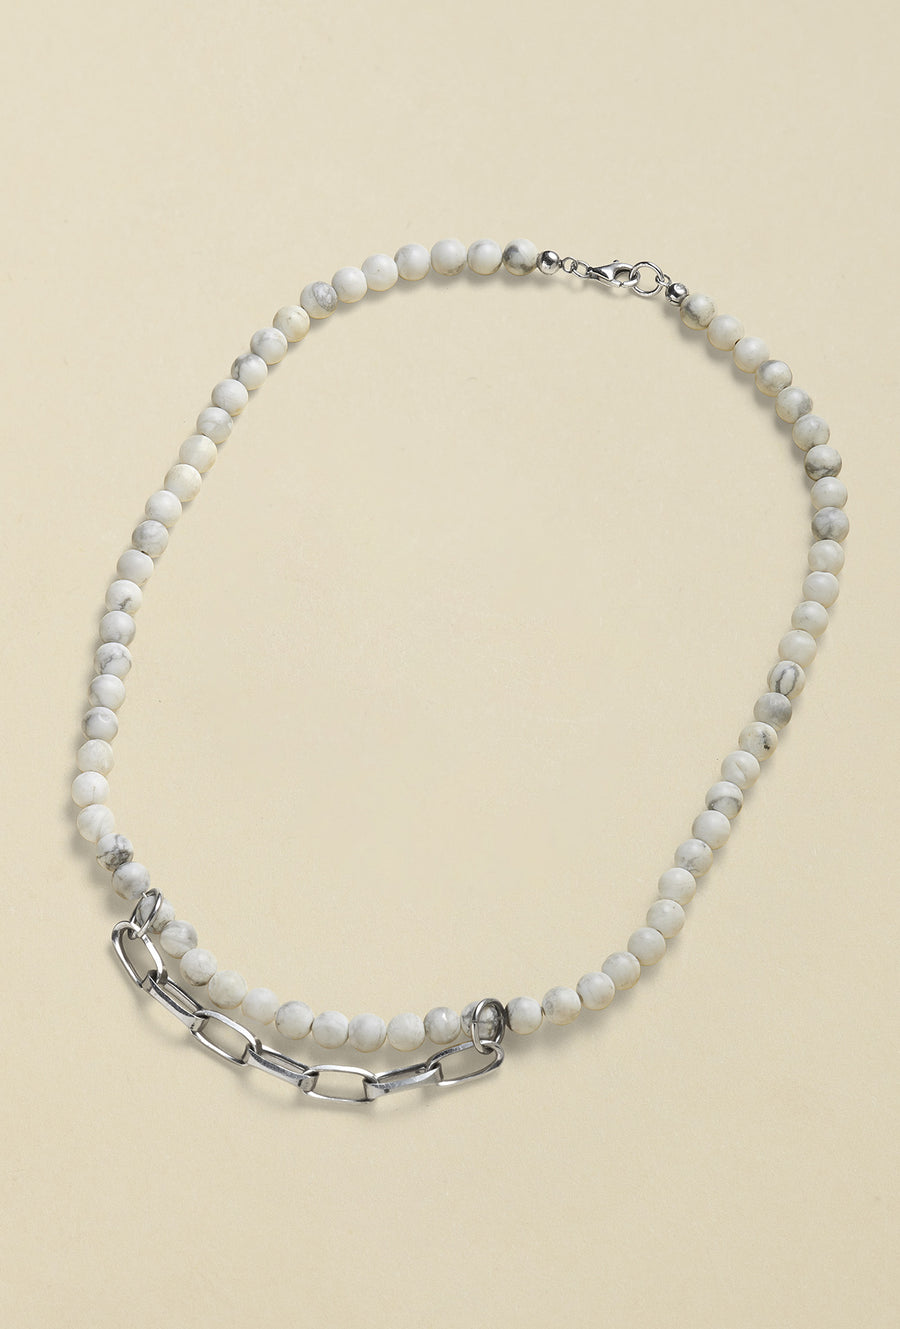 Howlith and Silver Necklace I